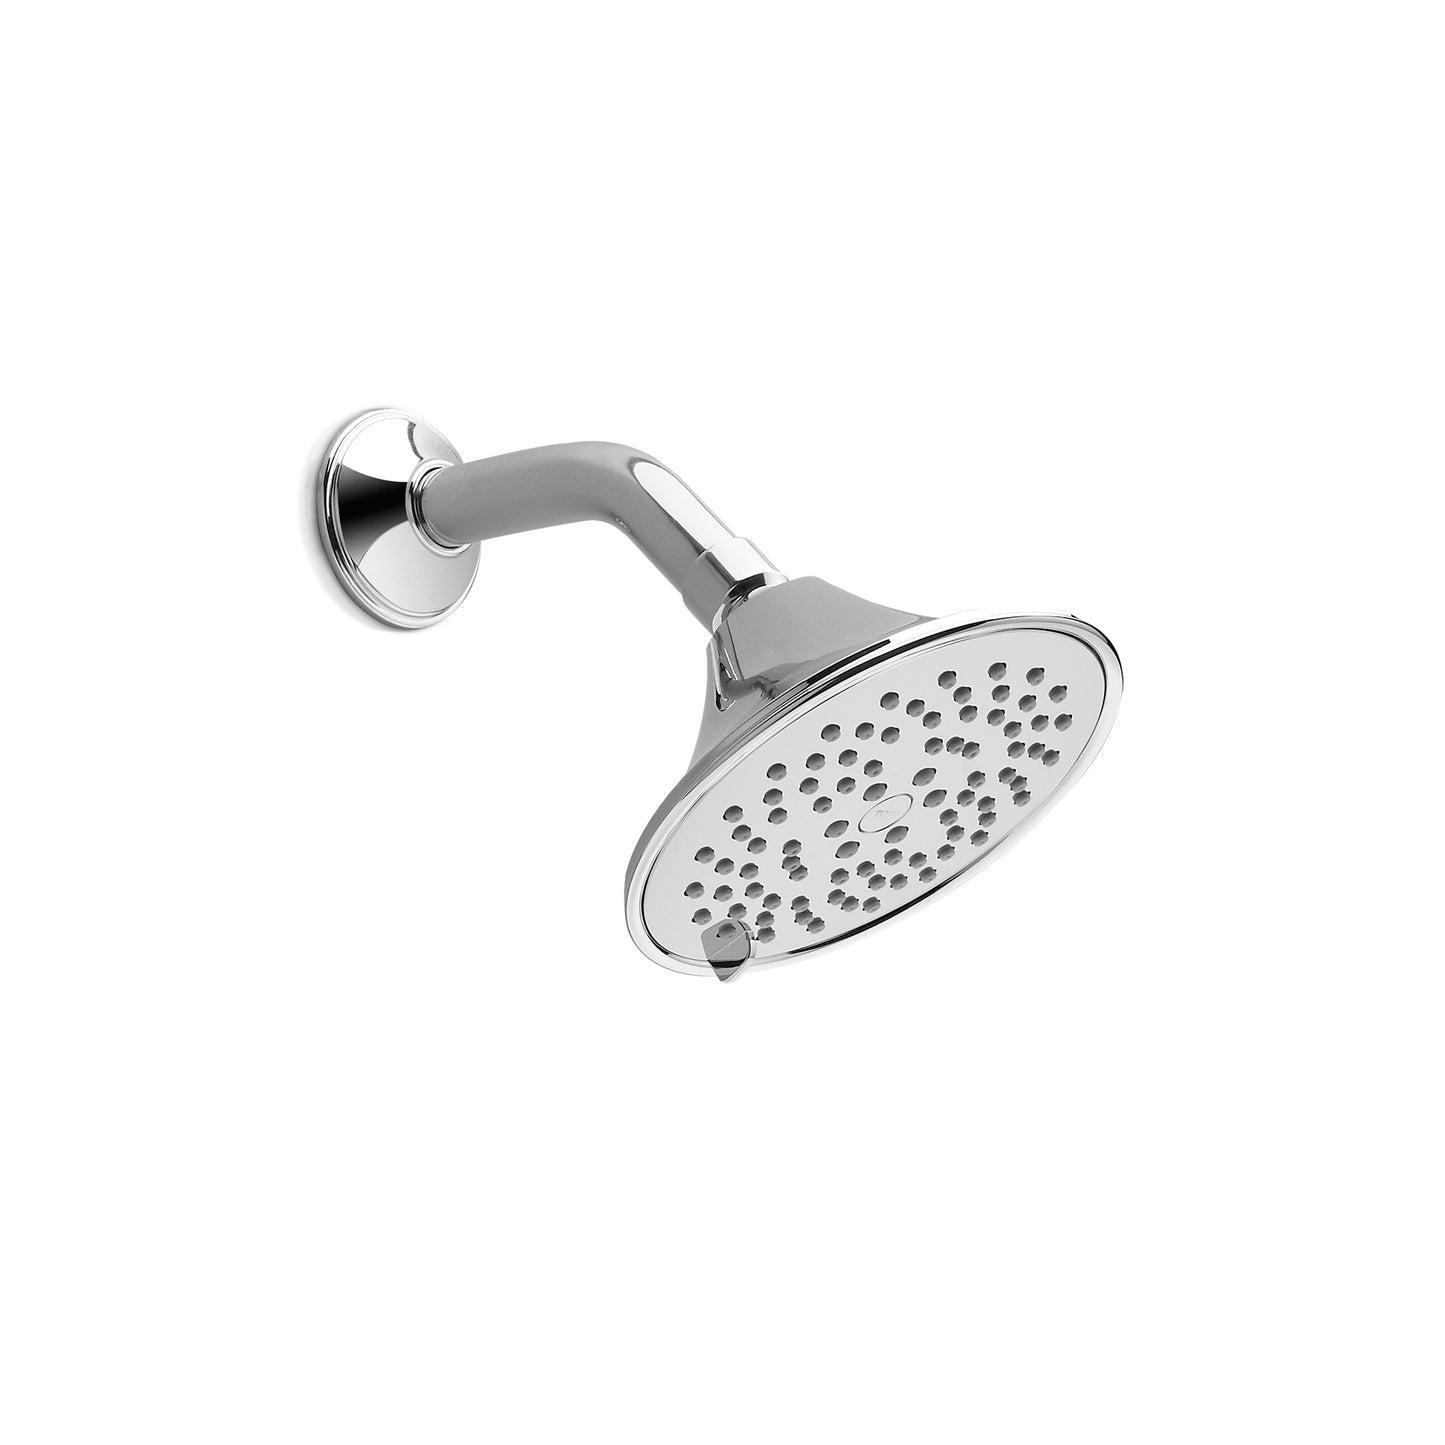 Toto TS200AL65#CP - Transitional 5.5" Multi Function Shower Head with RubberNozzles- Polished Chrome